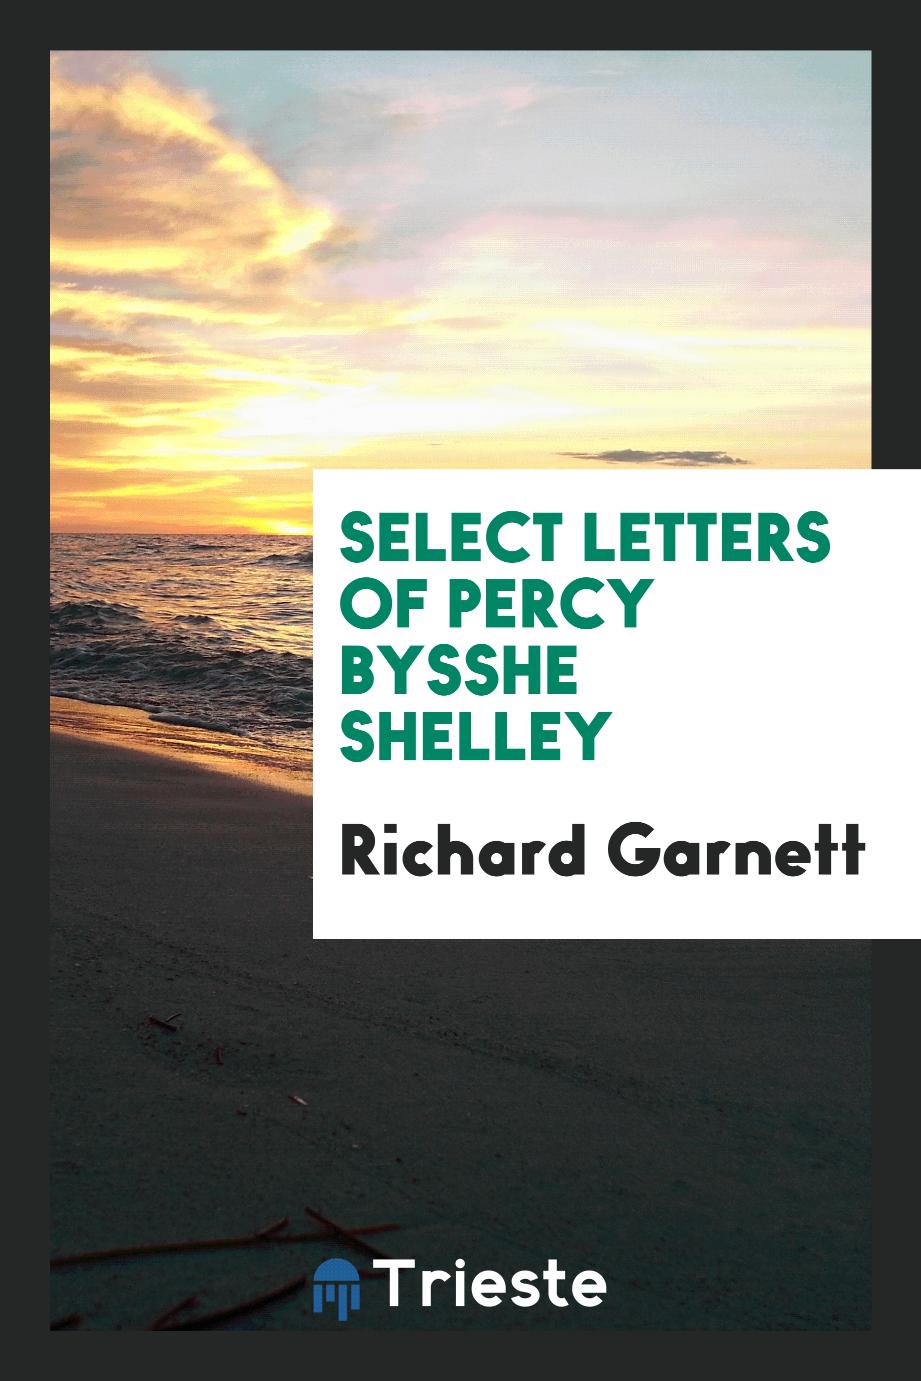 Select letters of Percy Bysshe Shelley